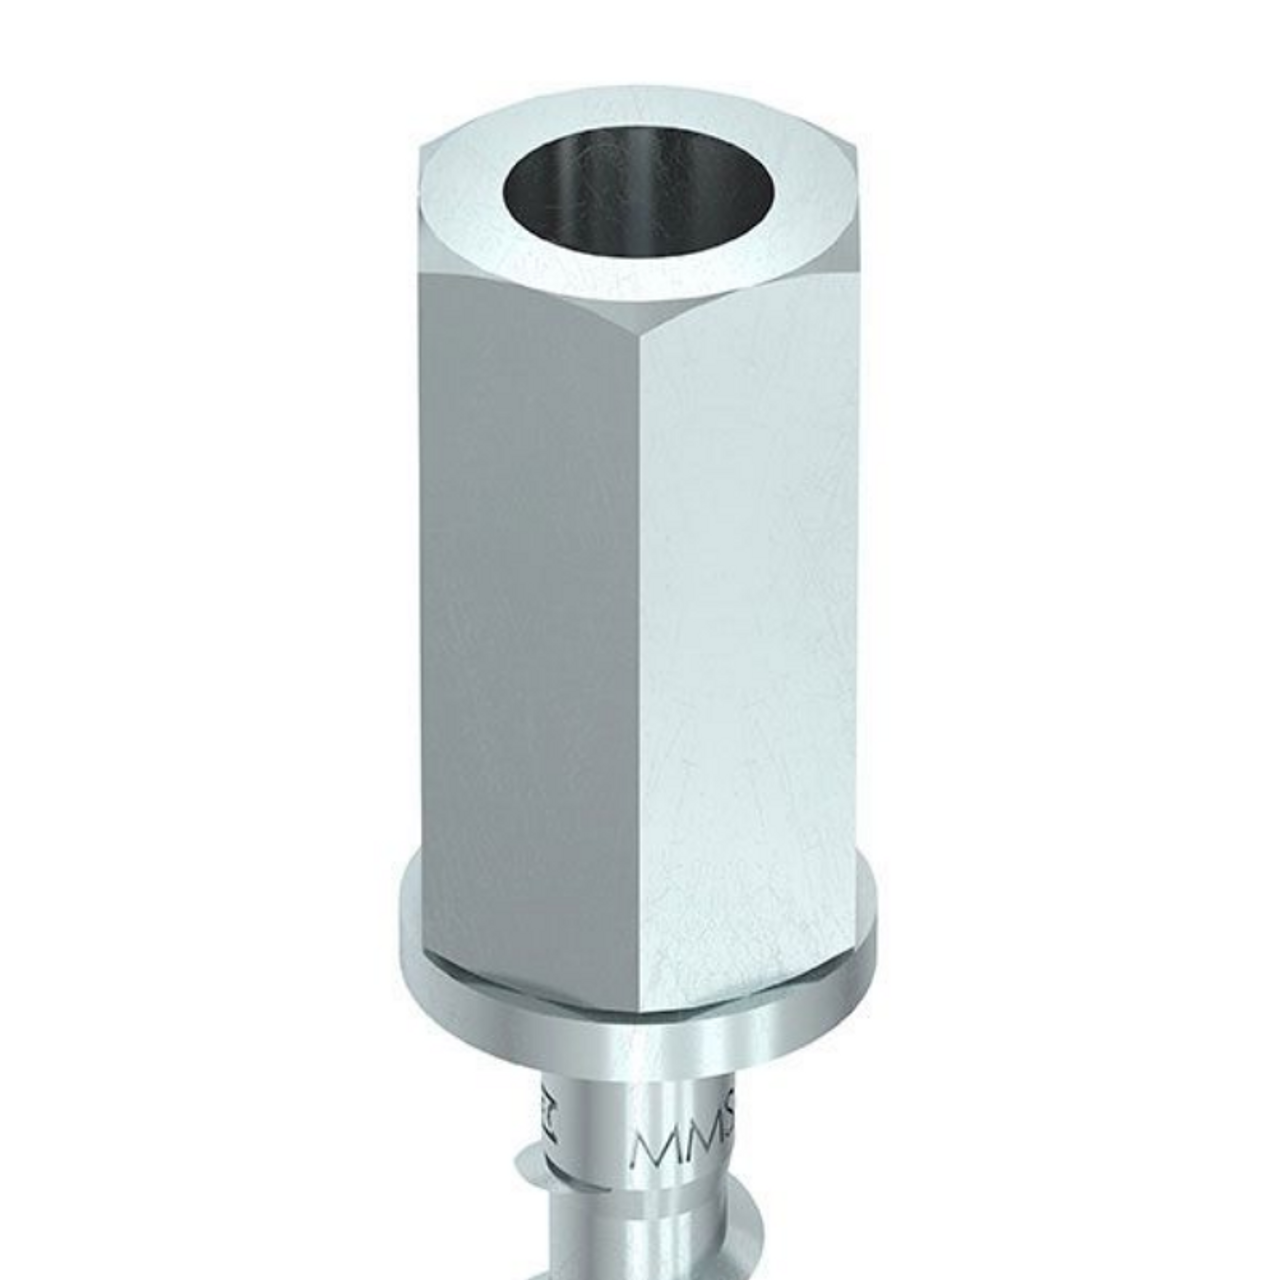 Buy Online a M6 Internal Thread Screw Anchor from HECO 6mm Silver Zinc M6 Internal Thread Screw Anchor with Silver Zinc for the Construction and Construction Industry and Installers in Australia and New Zealand